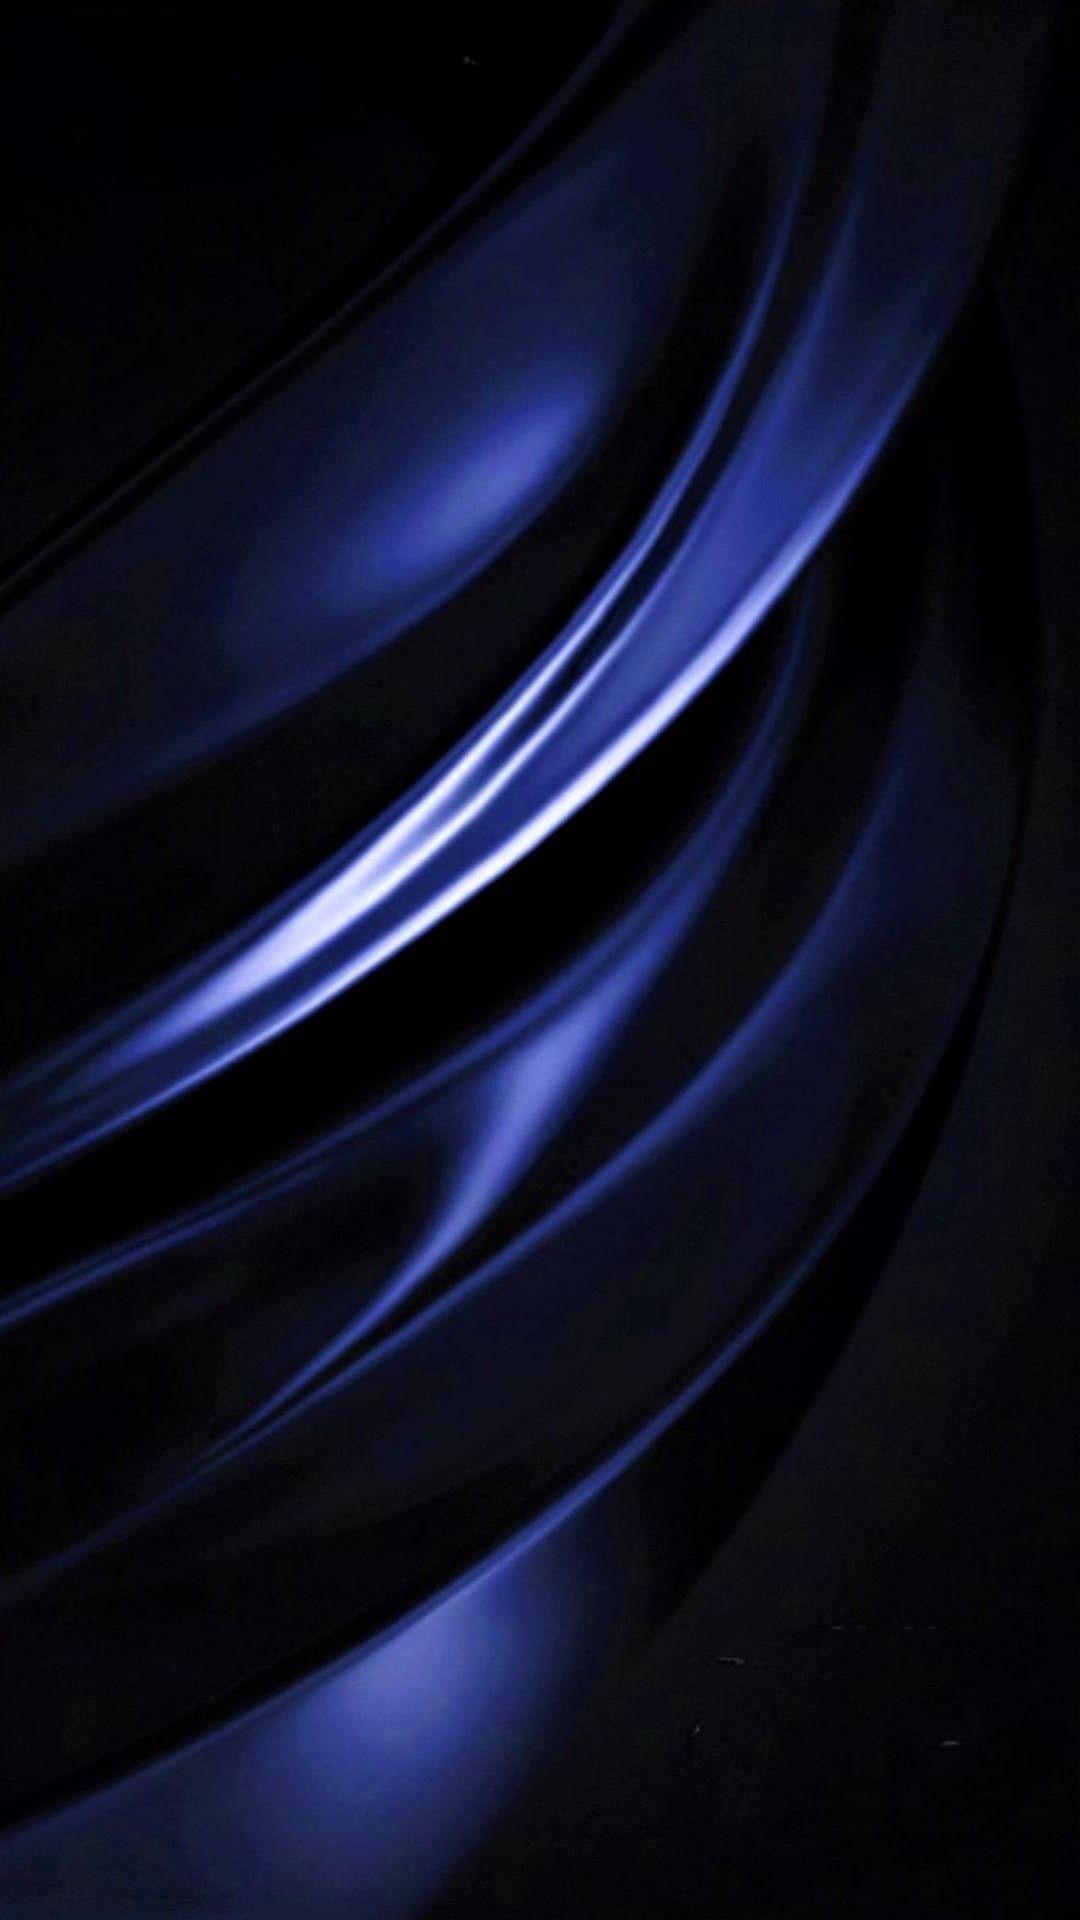 Abstract Blue And Grey HD Wallpaper Android. Android wallpaper, Background phone wallpaper, Abstract art wallpaper